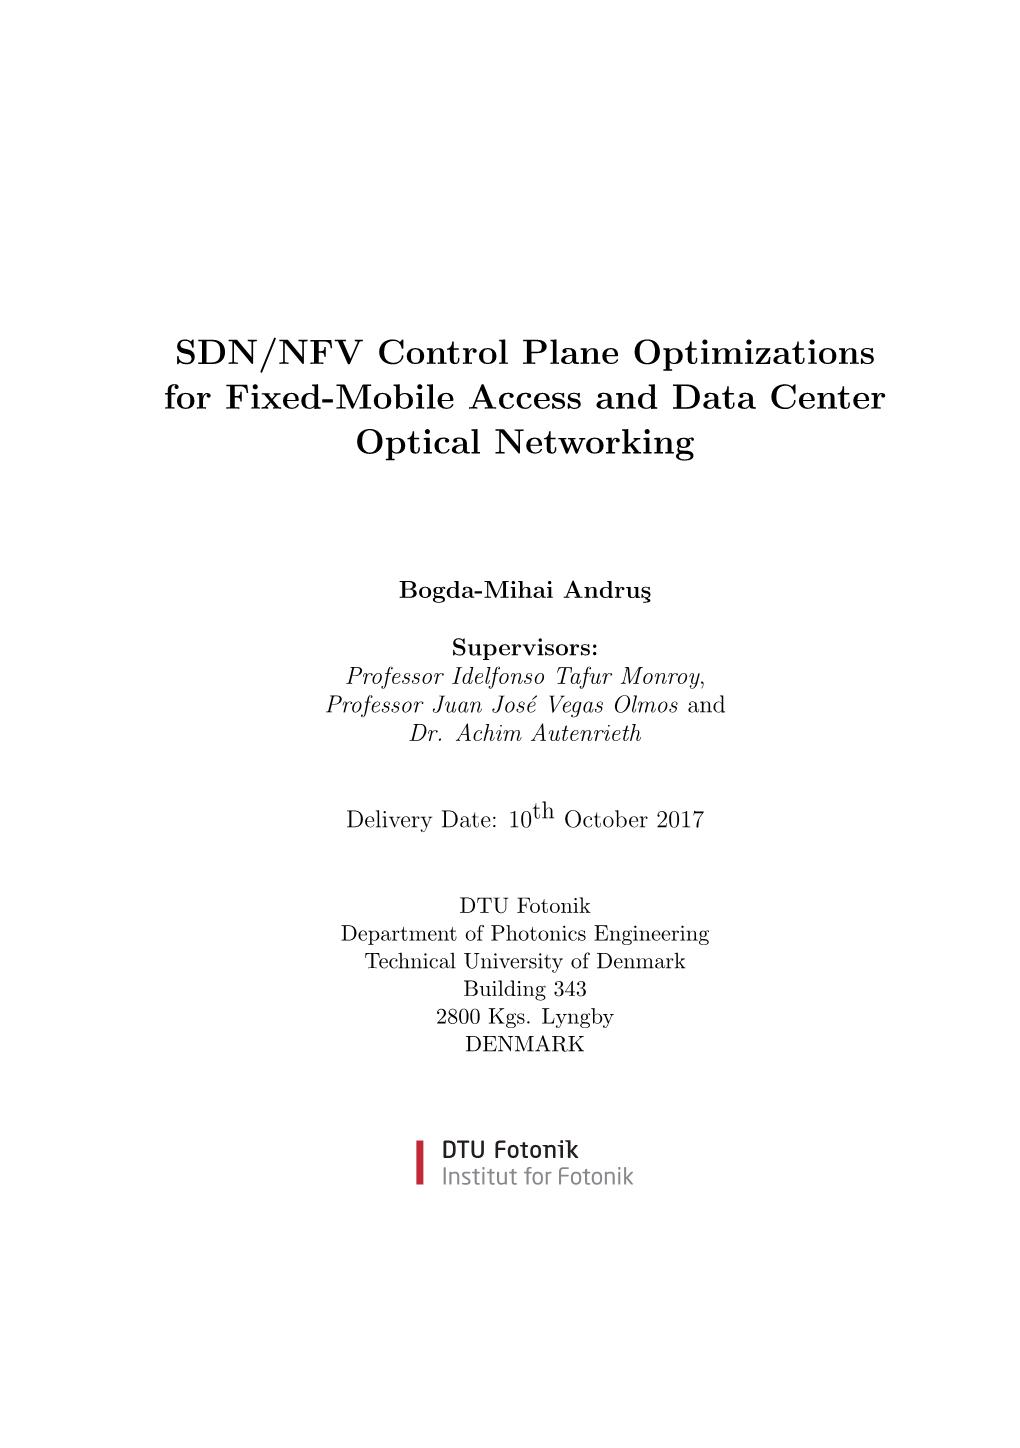 SDN/NFV Control Plane Optimizations for Fixed-Mobile Access and Data Center Optical Networking